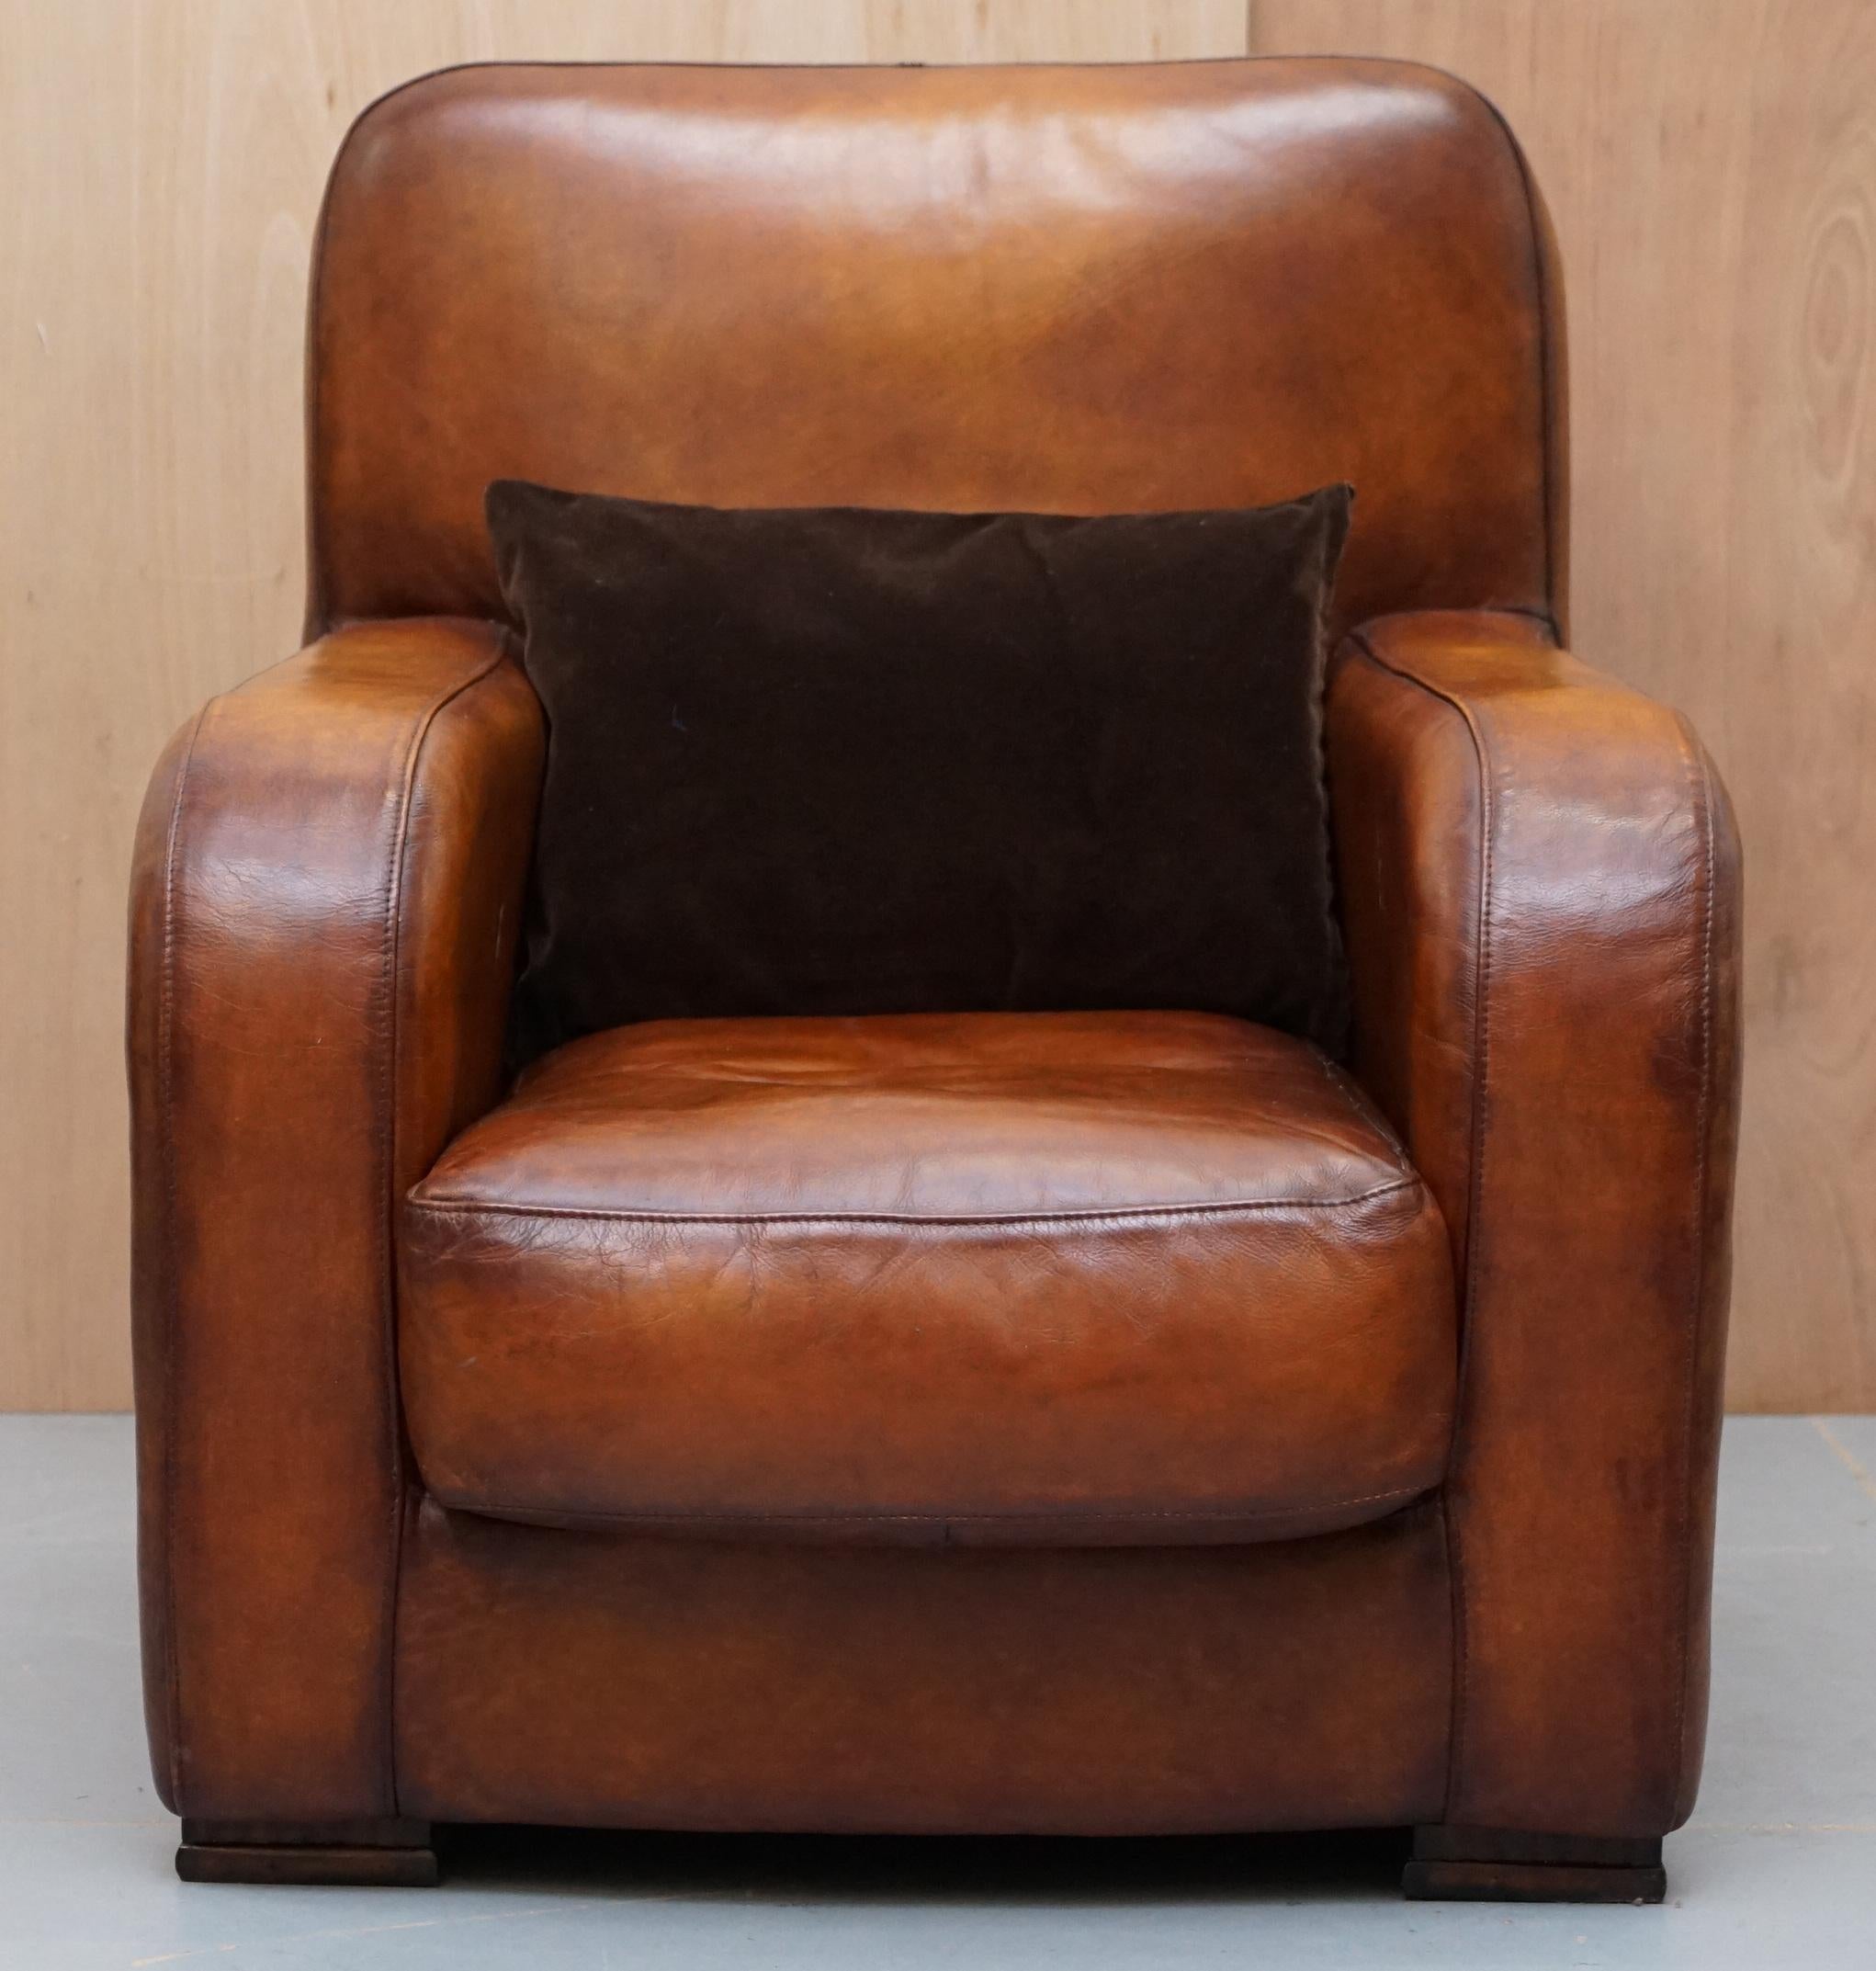 We are delighted to offer for sale this lovely exceptionally comfortable Tetrad Totnes brown leather armchair with lumbar cushion

This is one of my favourite modern armchairs, the style fits in with any setting, its exceptionally comfortable,